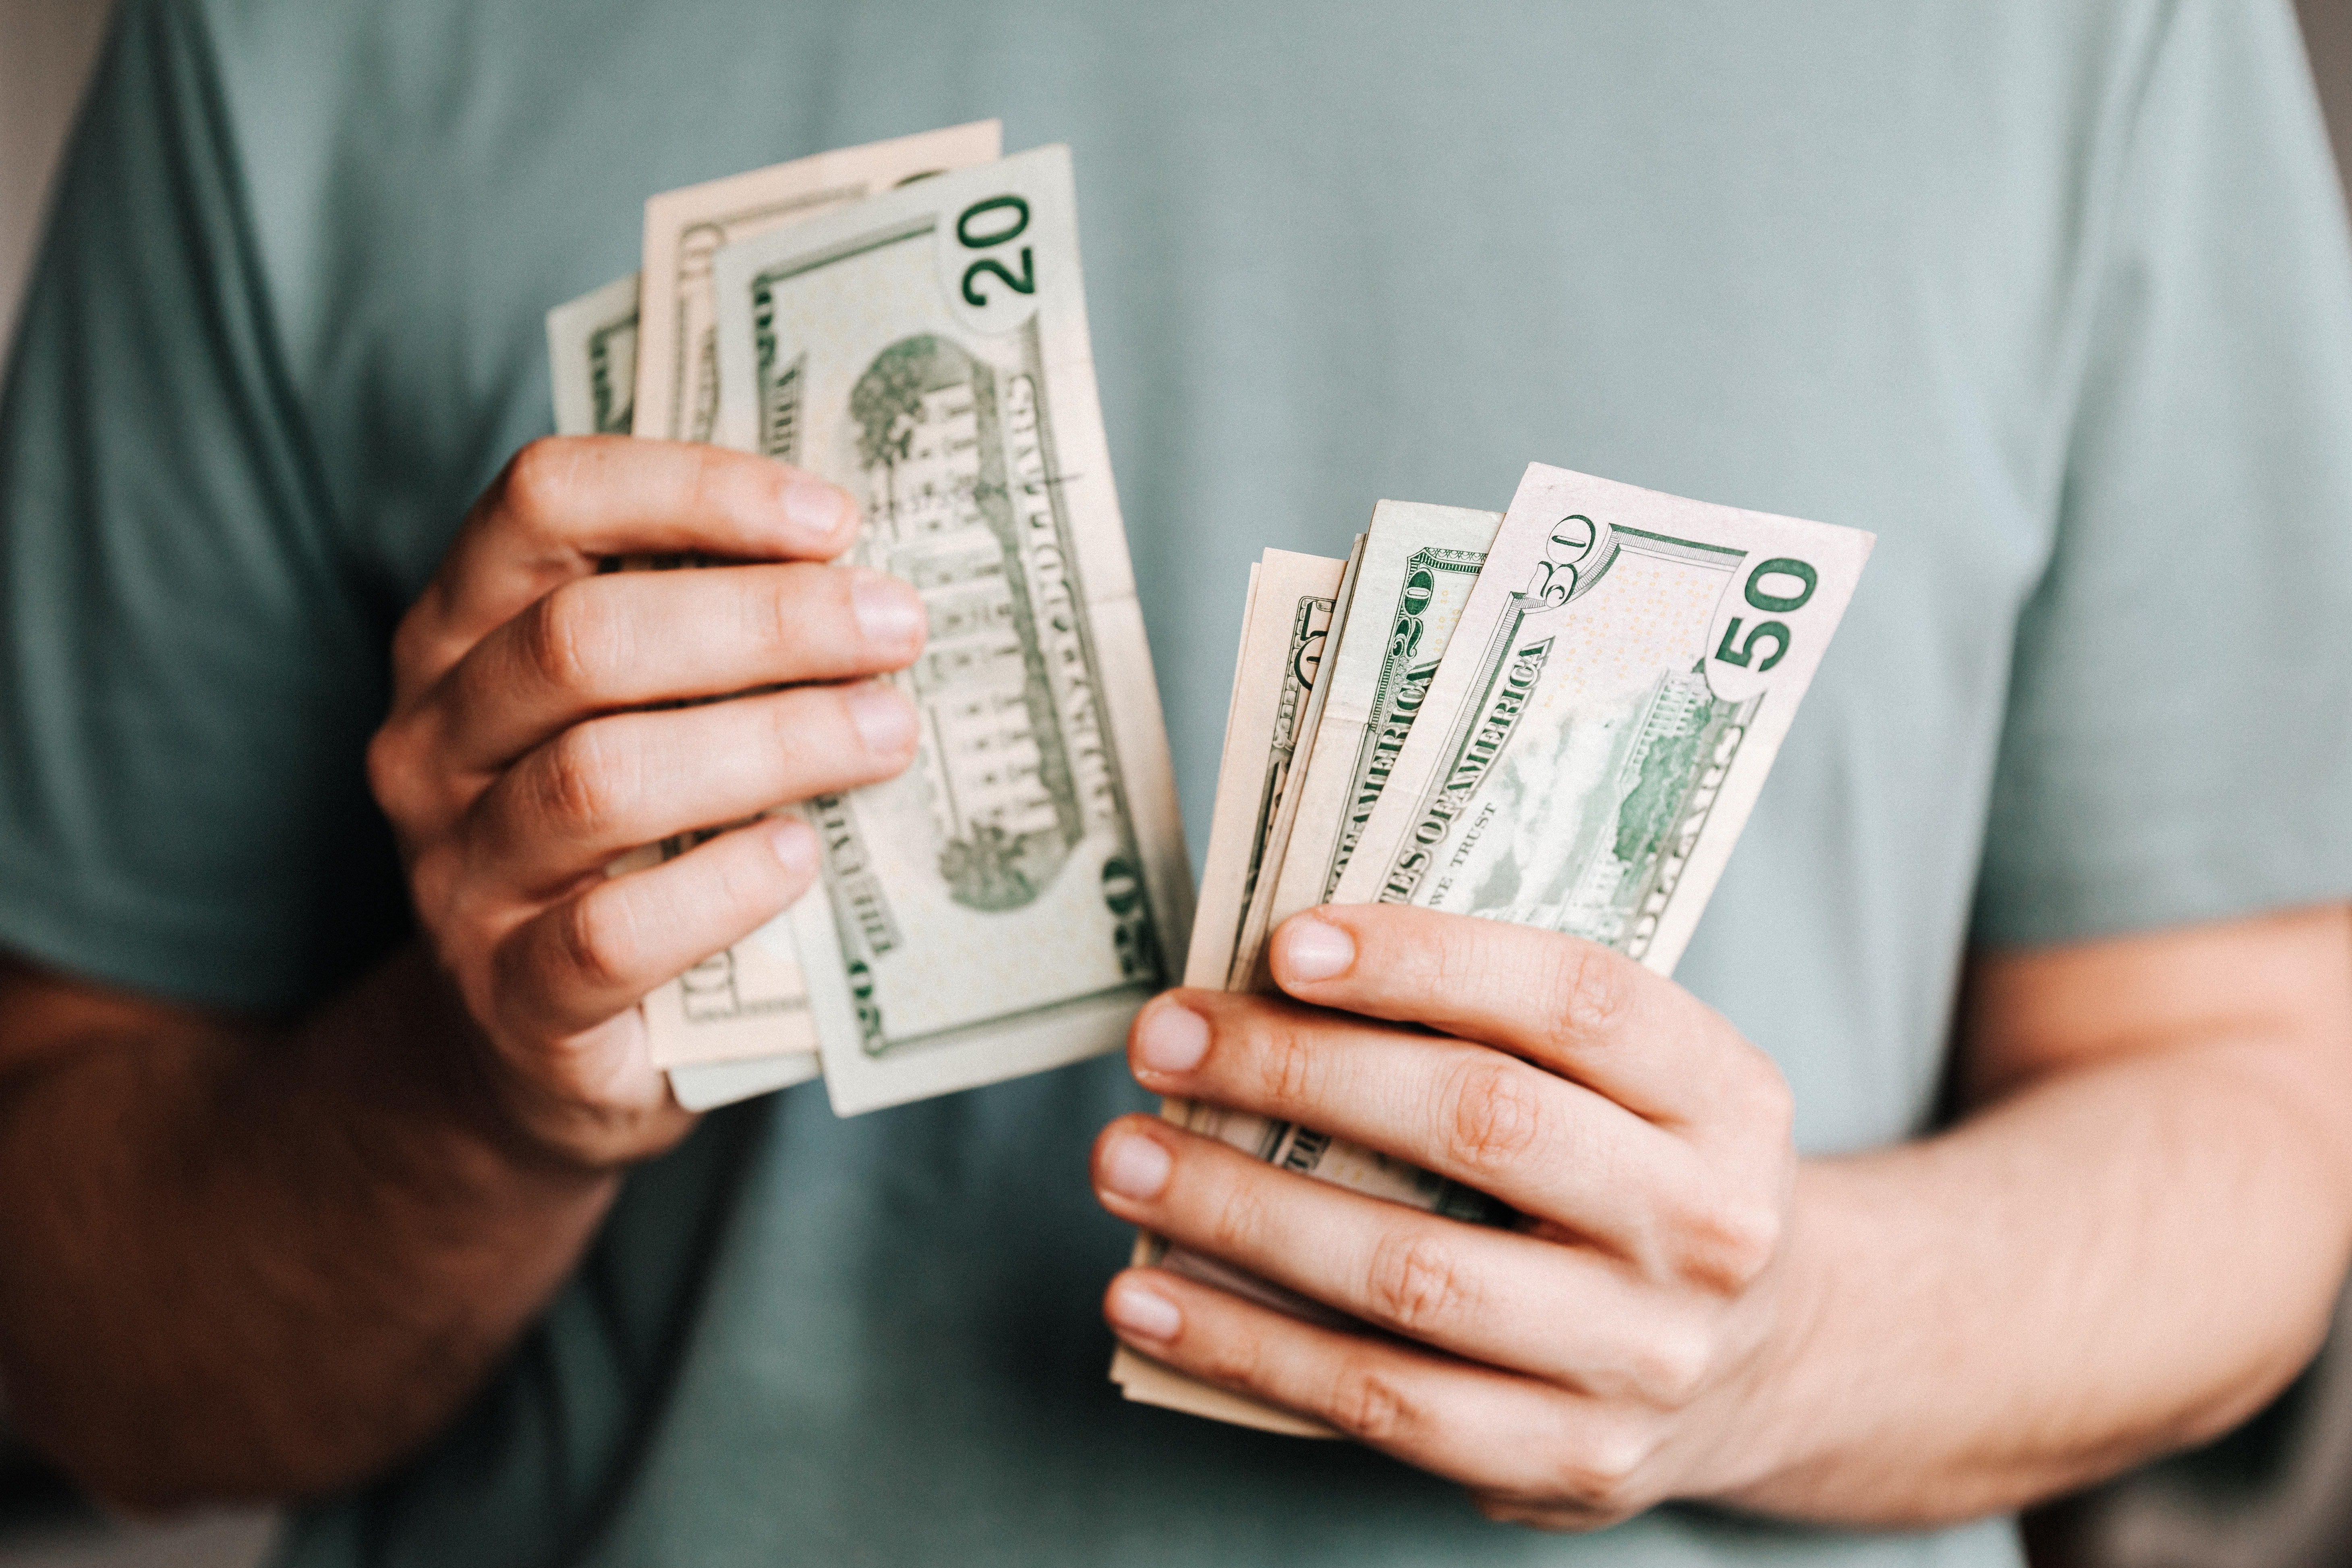 The man felt sorry for Jack & gave him $ 150 for washing his car windows.  |  Source: Pexels